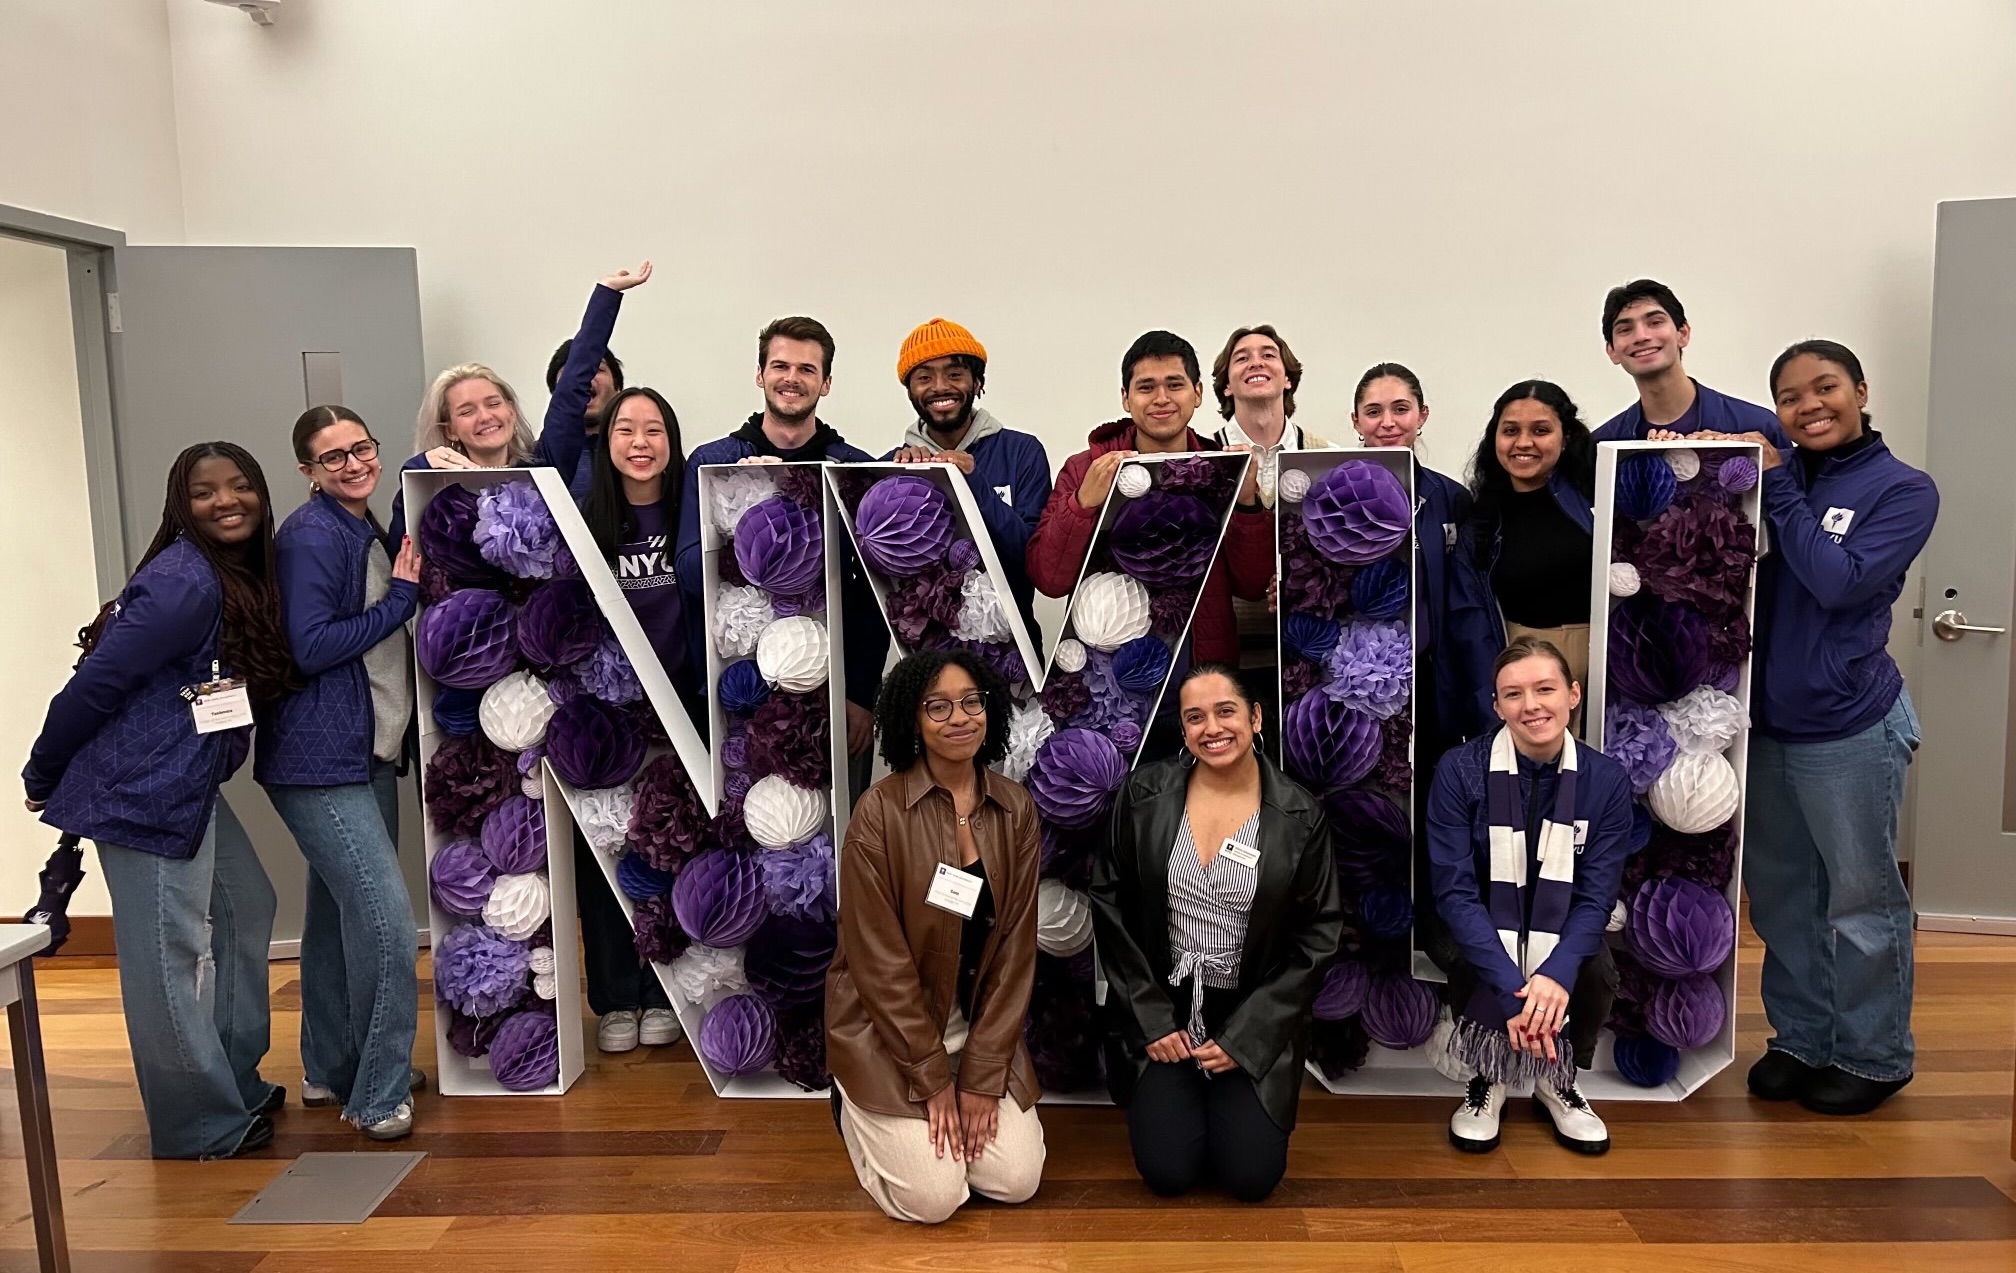 A group of Admissions Ambassadors pose in front of large “NYU” letters filled with purple pom-poms.